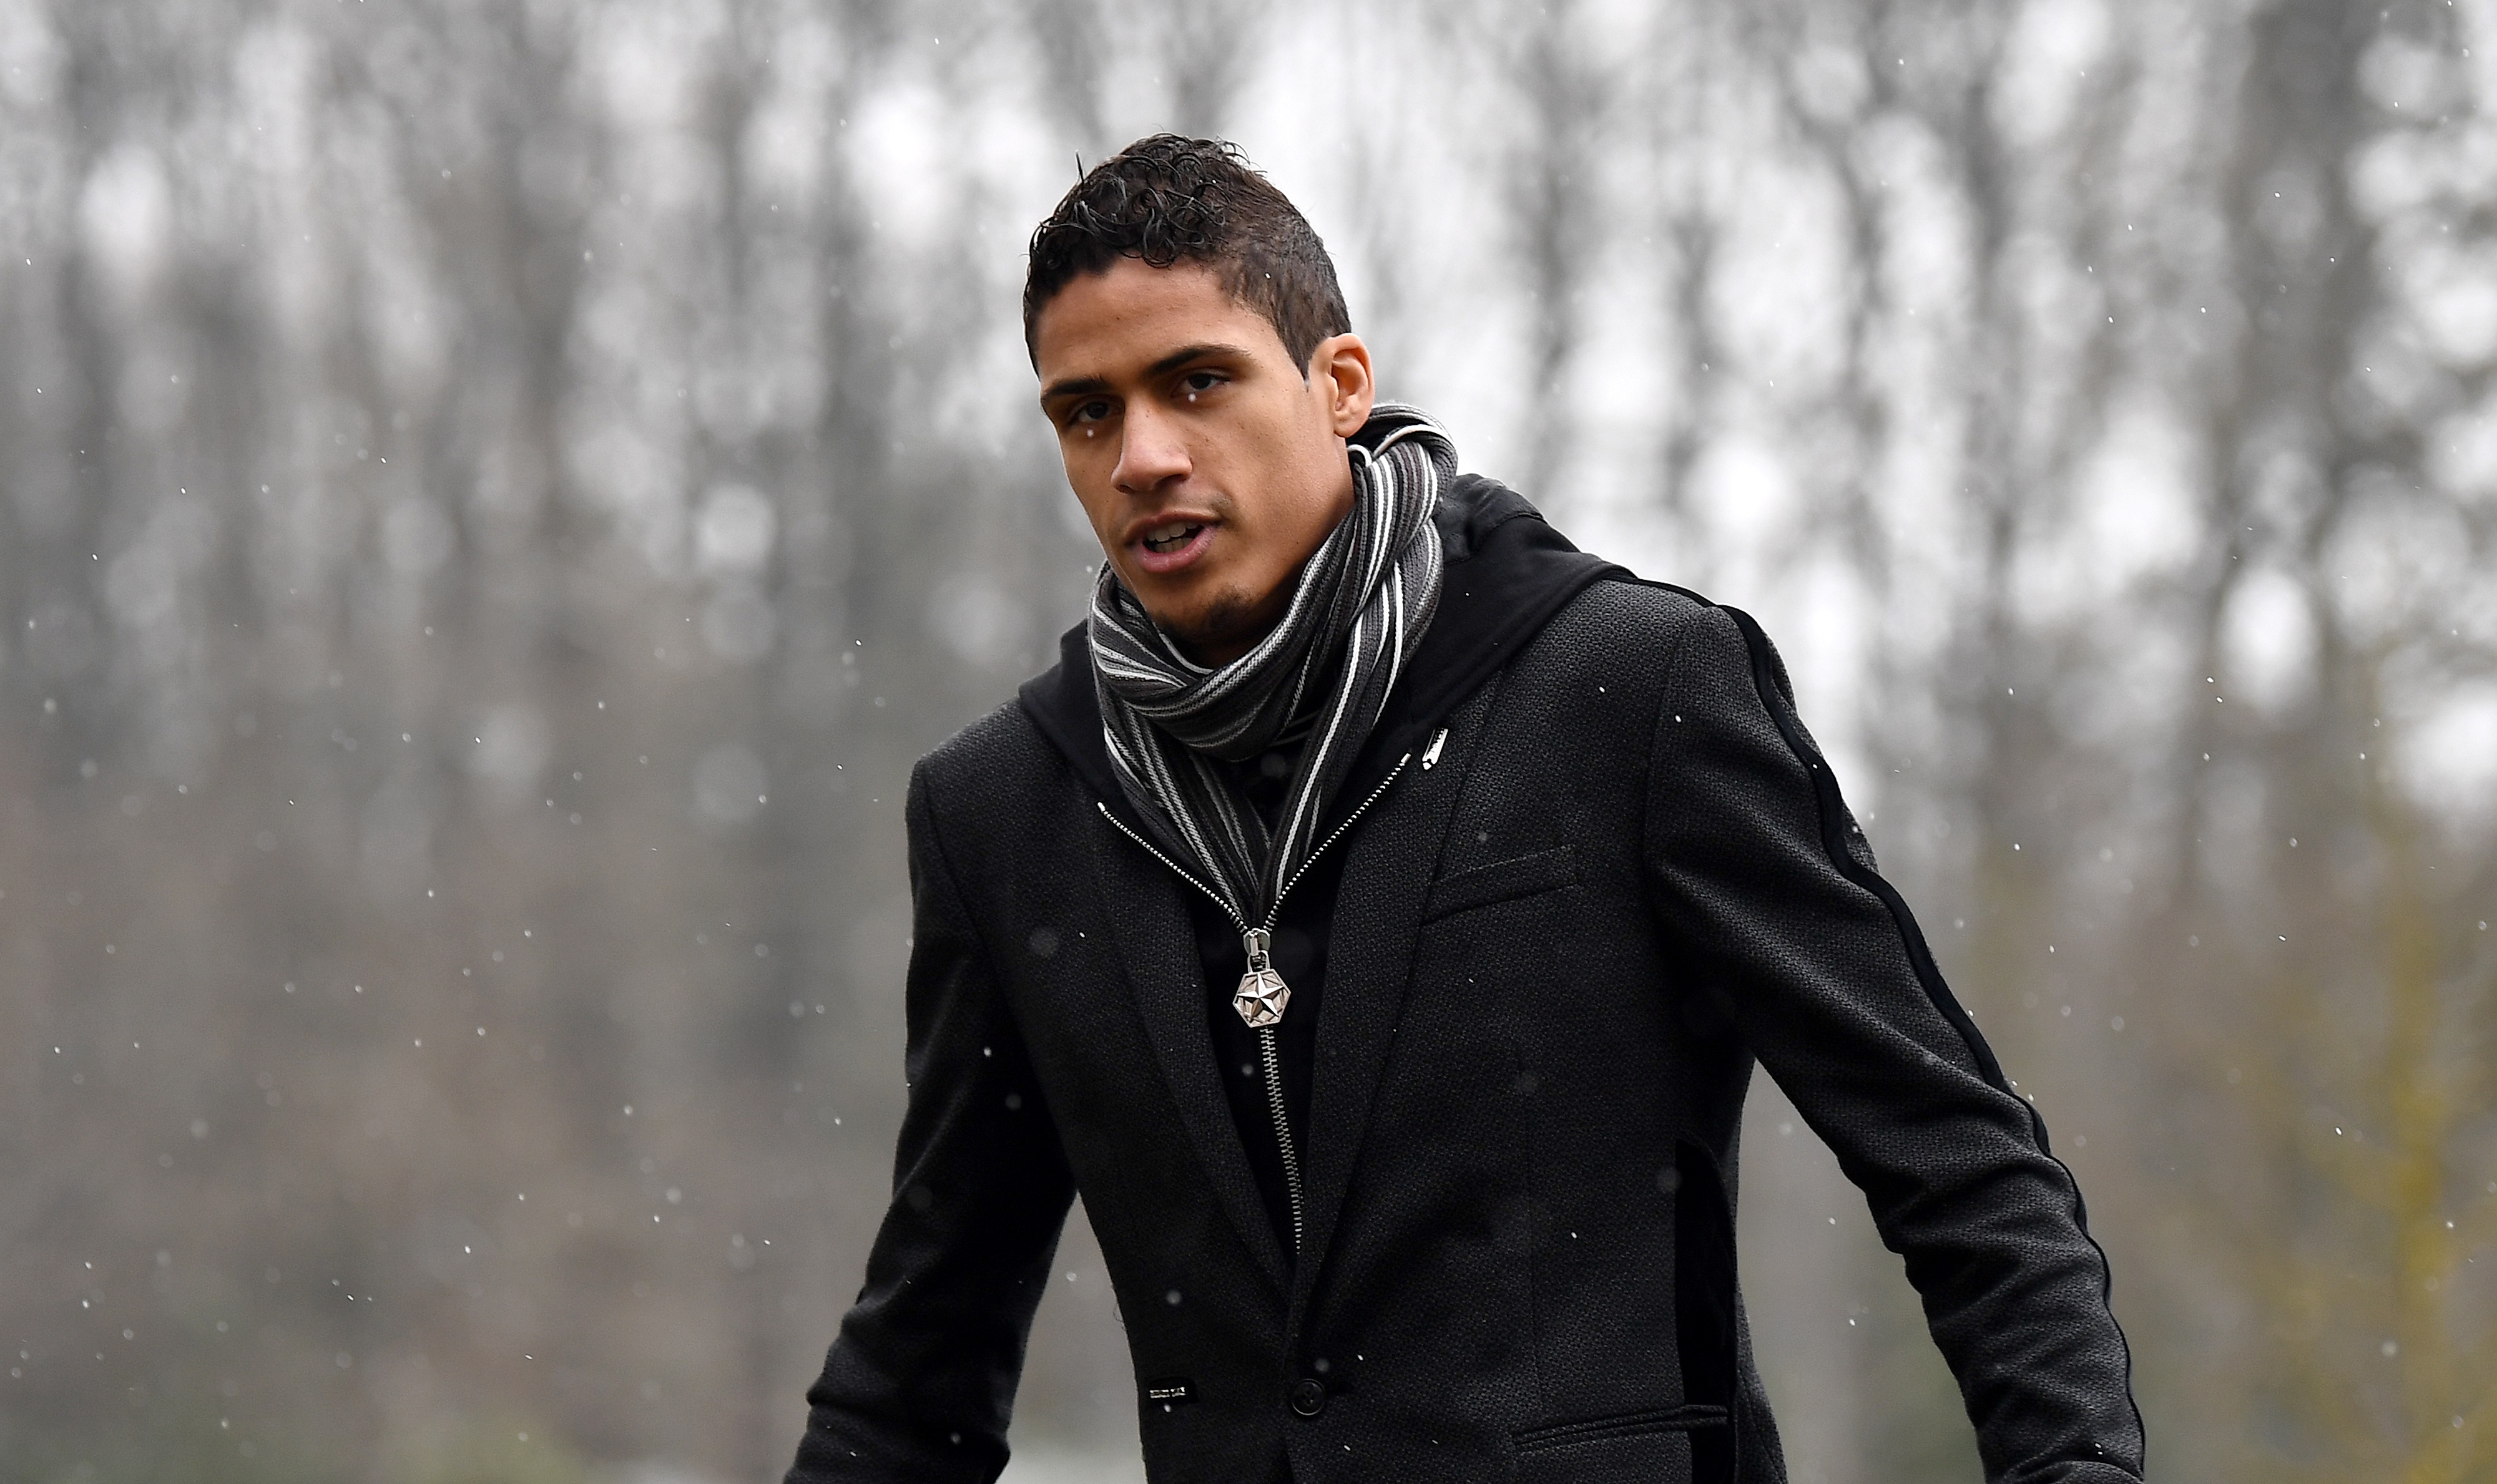 France's defender Raphaël Varane arrives at the French national football team training base in Clairefontaine-en-Yvelines, on March 19, 2018, as part of the  preparation for the team's upcoming friendly matches. / AFP PHOTO / FRANCK FIFE        (Photo credit should read FRANCK FIFE/AFP/Getty Images)